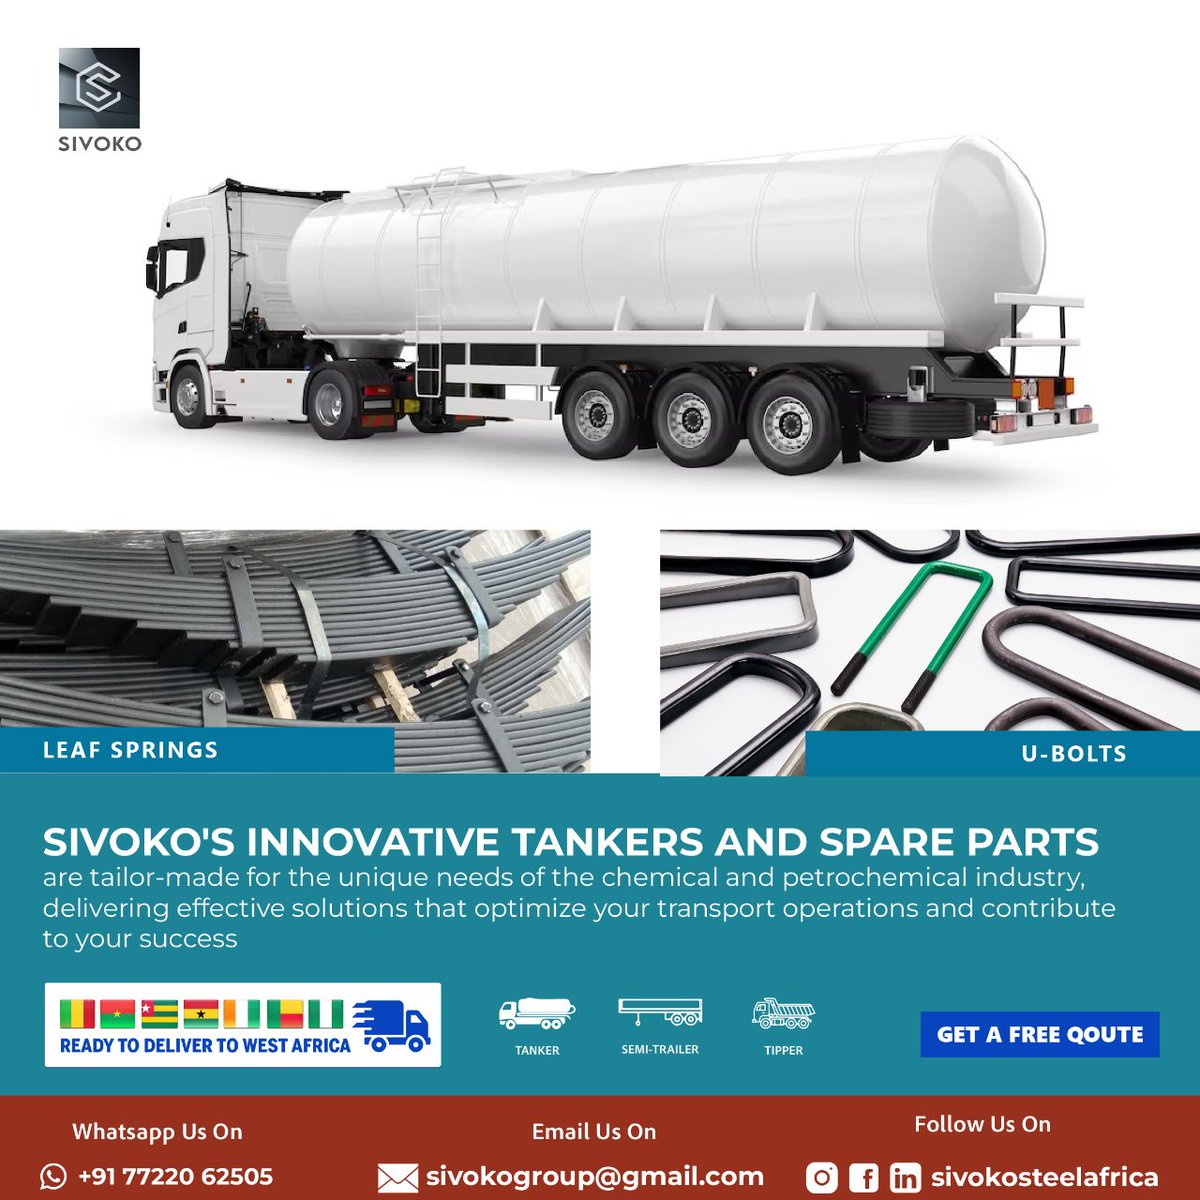 Elevating Efficiency: Sivoko Tankers and Premium Spare Parts for Unmatched Reliability.

Whatsapp us: +917722062505
Email us: Sivokogroup@gmail.com

#sivokoflatbedtrailers #transportationsolutions #heavydutyhauling #versatiletrailers #reliabletransport #efficientlogistics